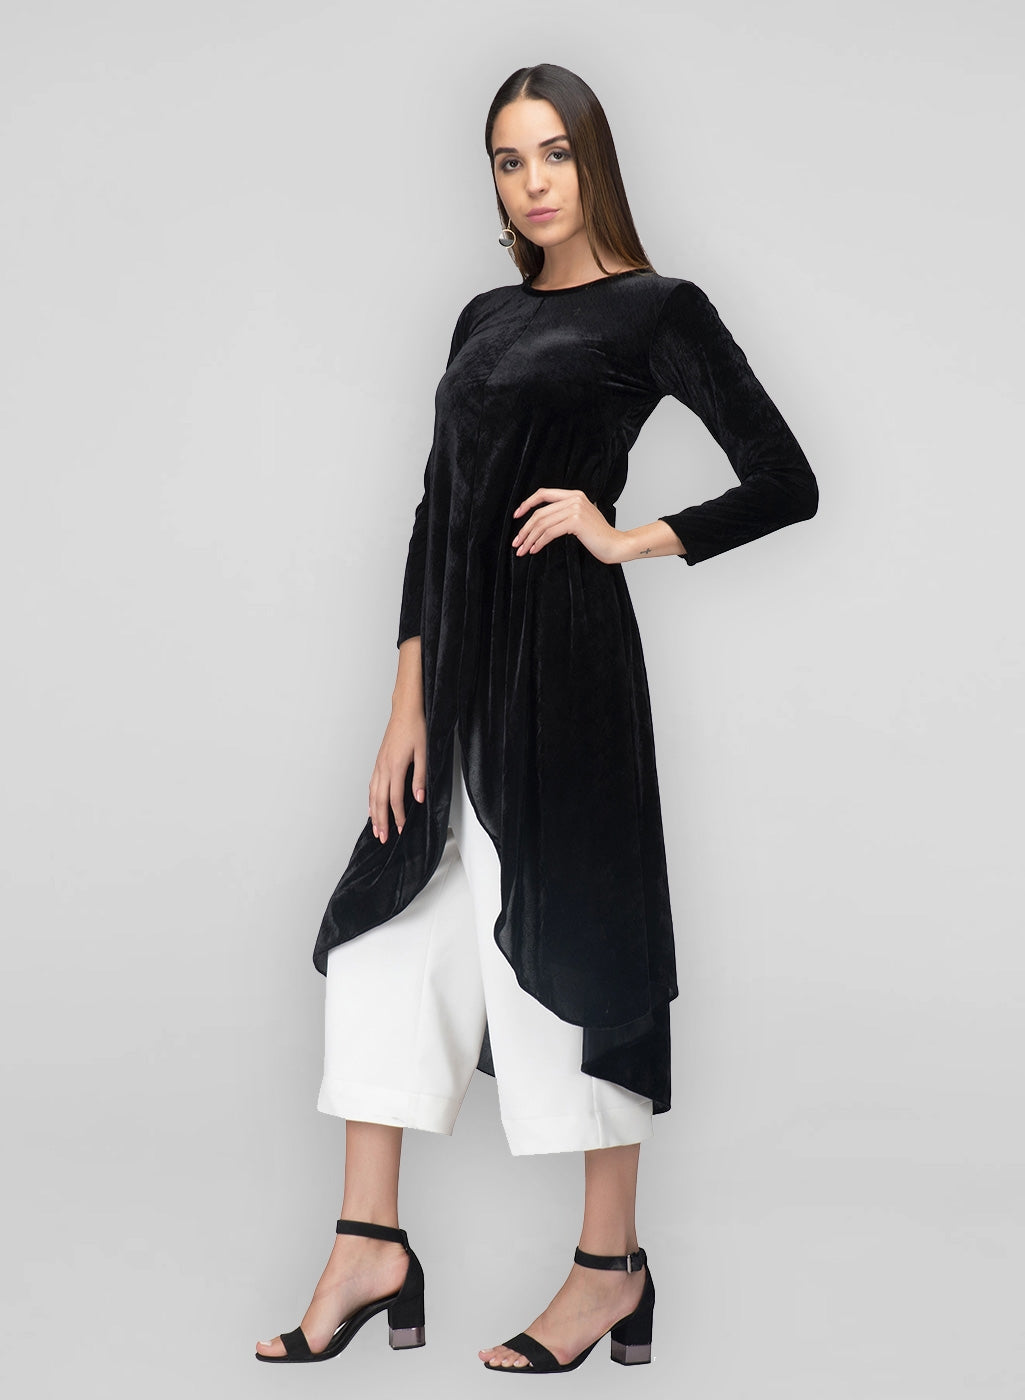 Full sleeves, closed neck, relaxed fit and a smart cut make this black aline velvet kurta a perfect choice for women's winter wardrobe.